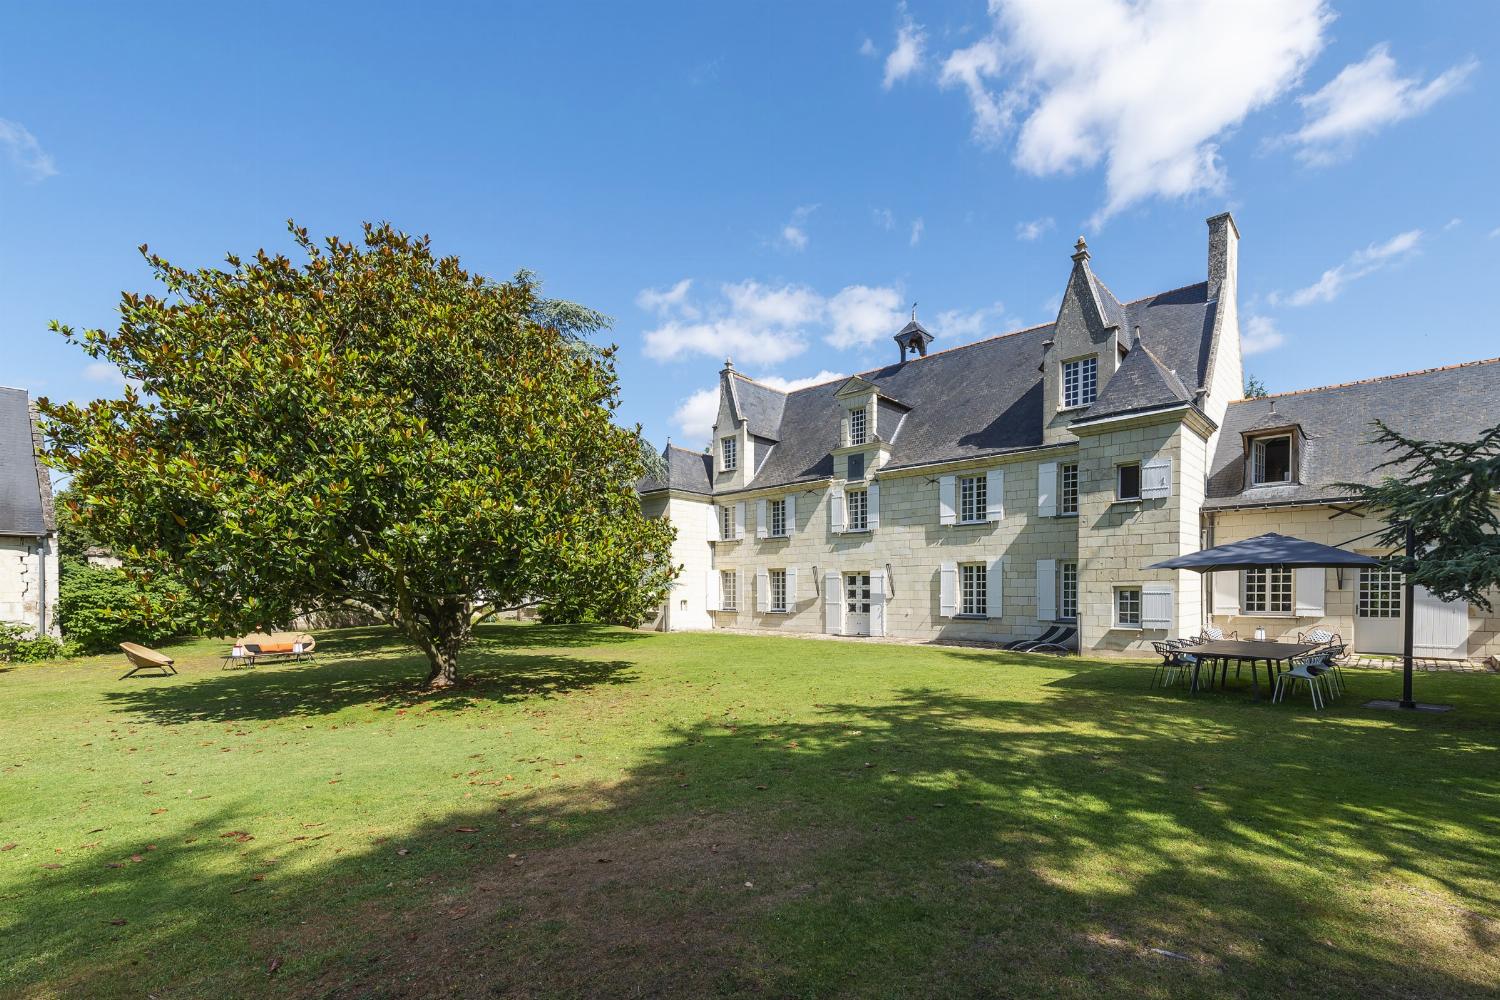 Holiday château in Loire Valley